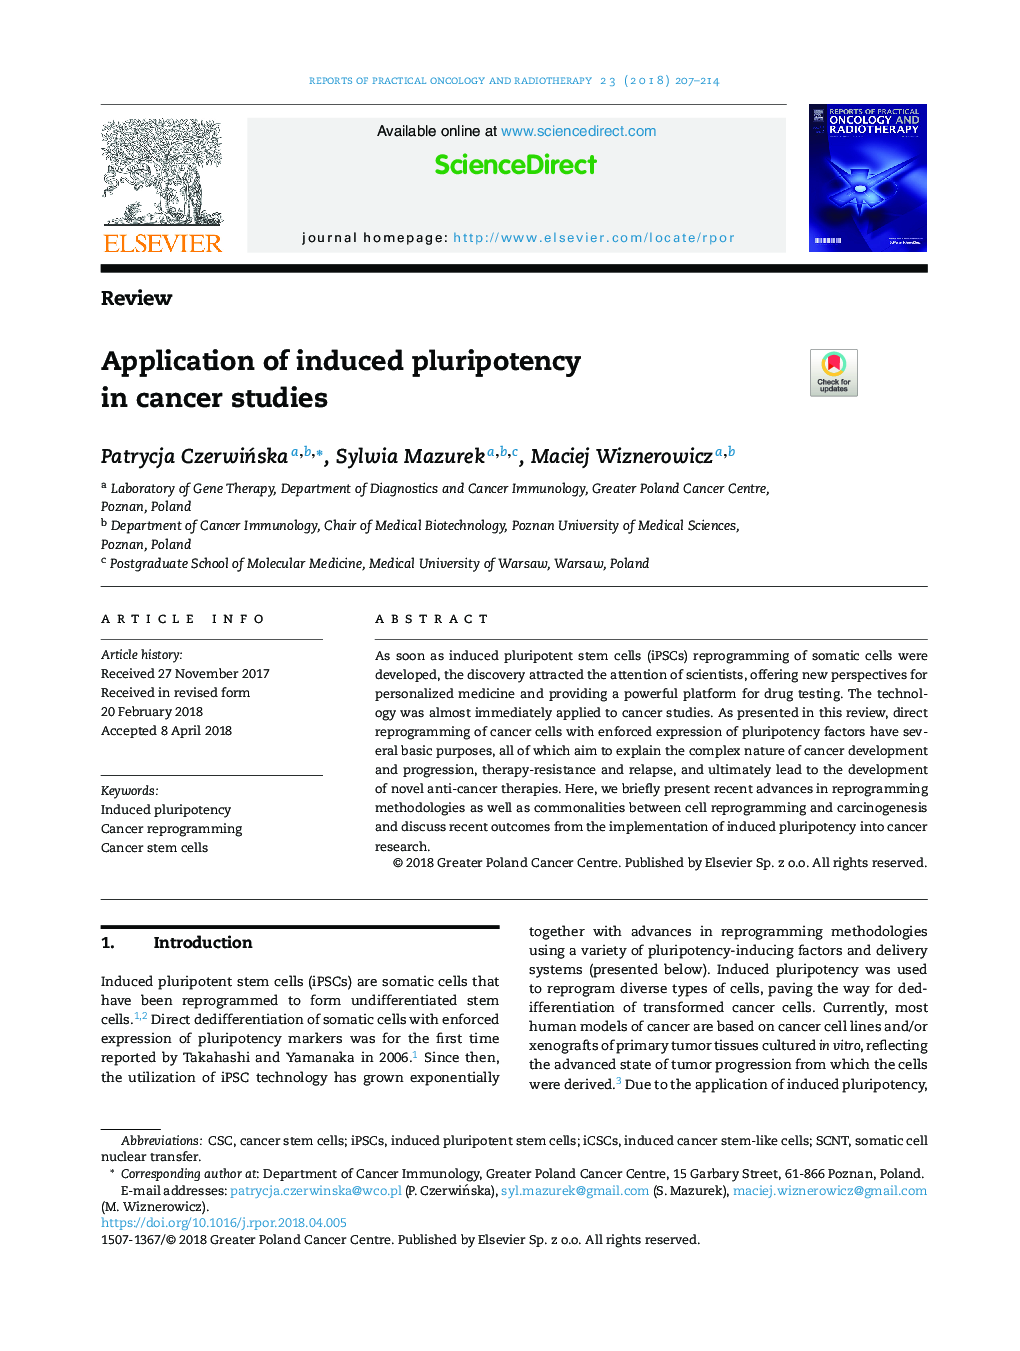 Application of induced pluripotency in cancer studies